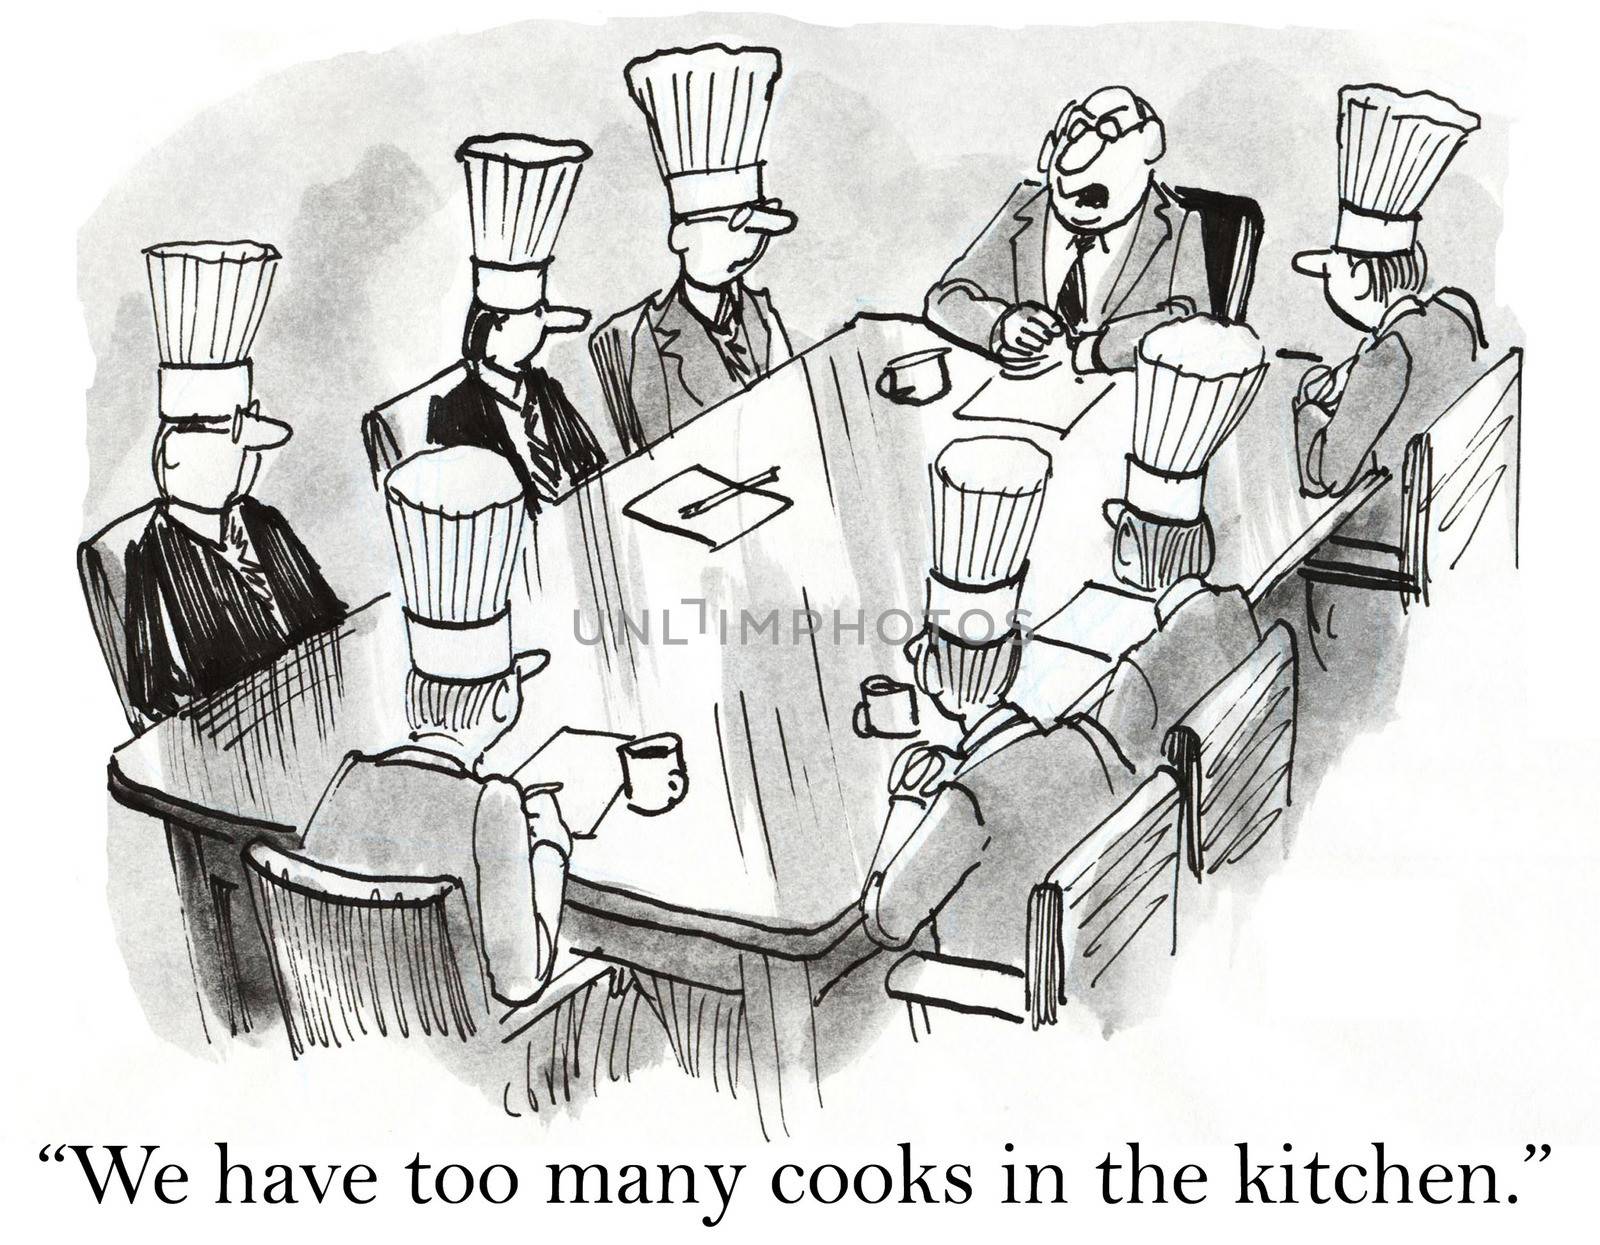 "We have too many cooks in the kitchen."